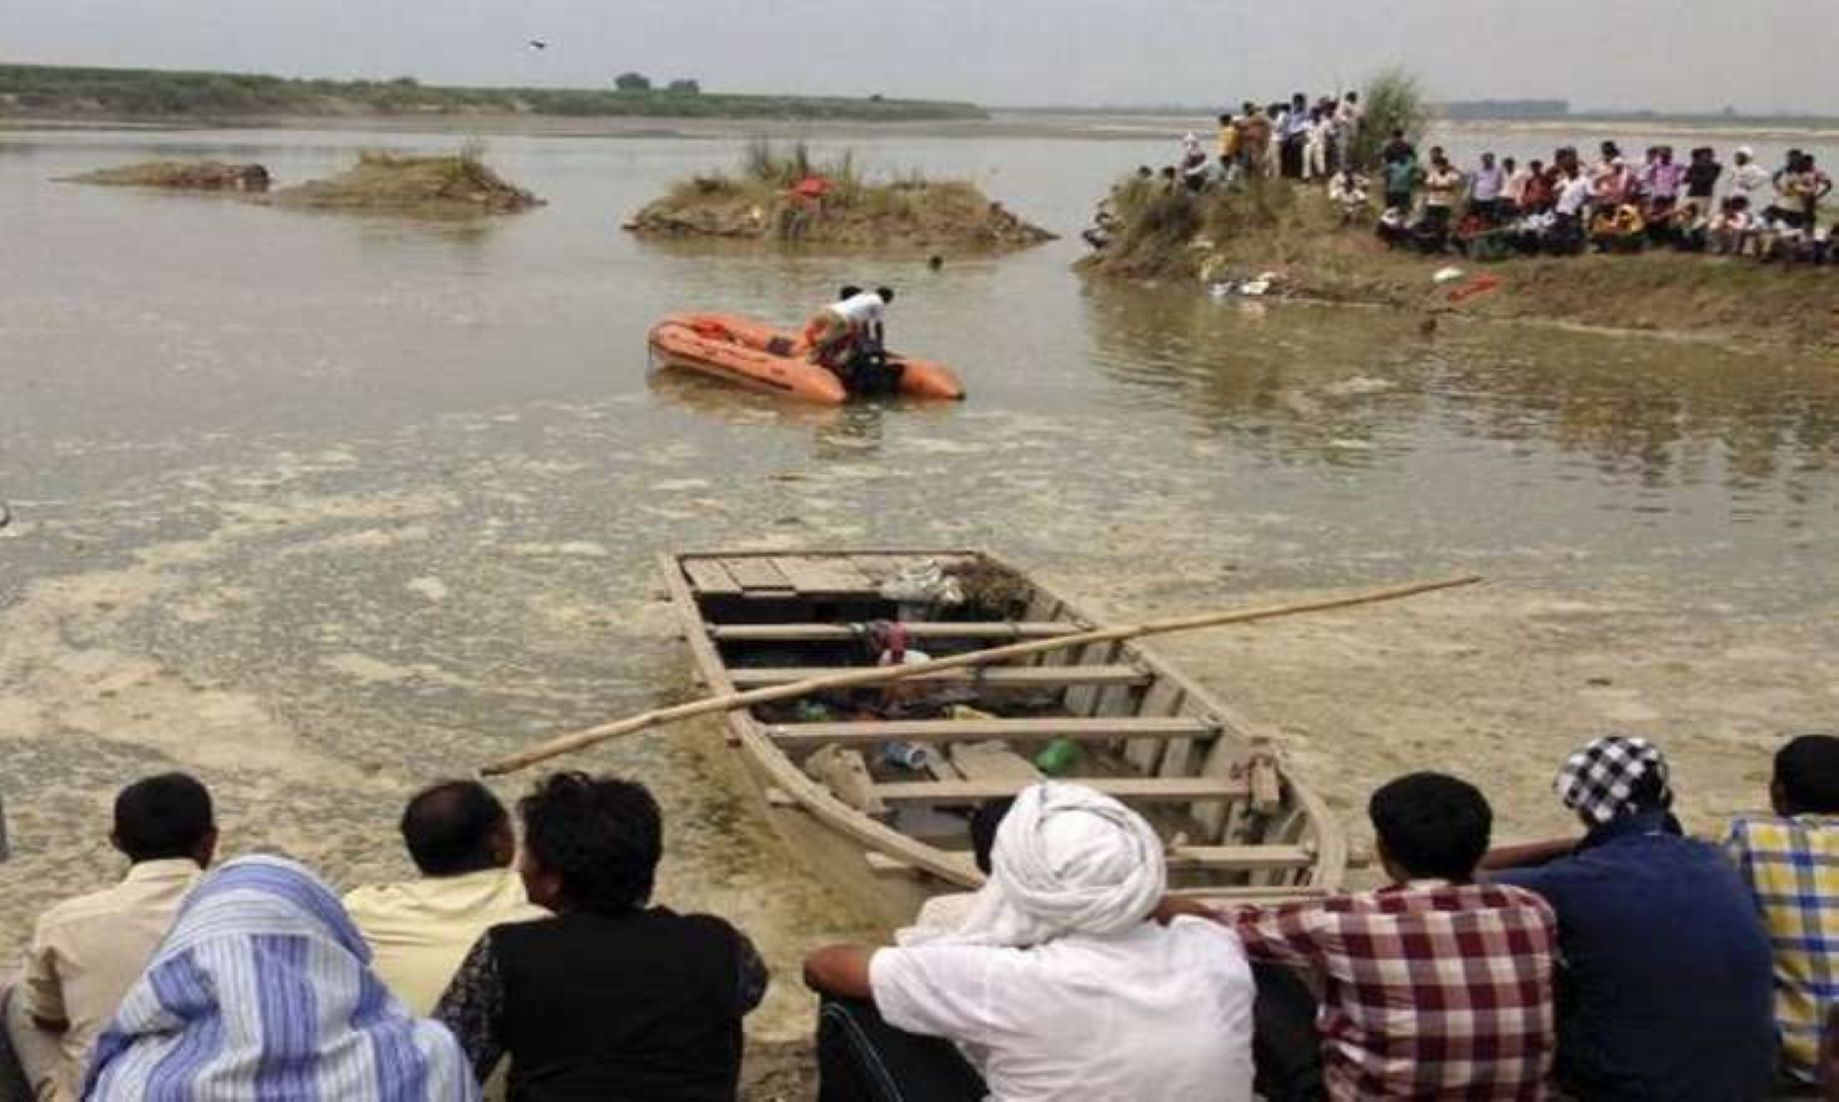 16 Children Rescued, Nine Missing From Capsized Boat In NW Pakistan